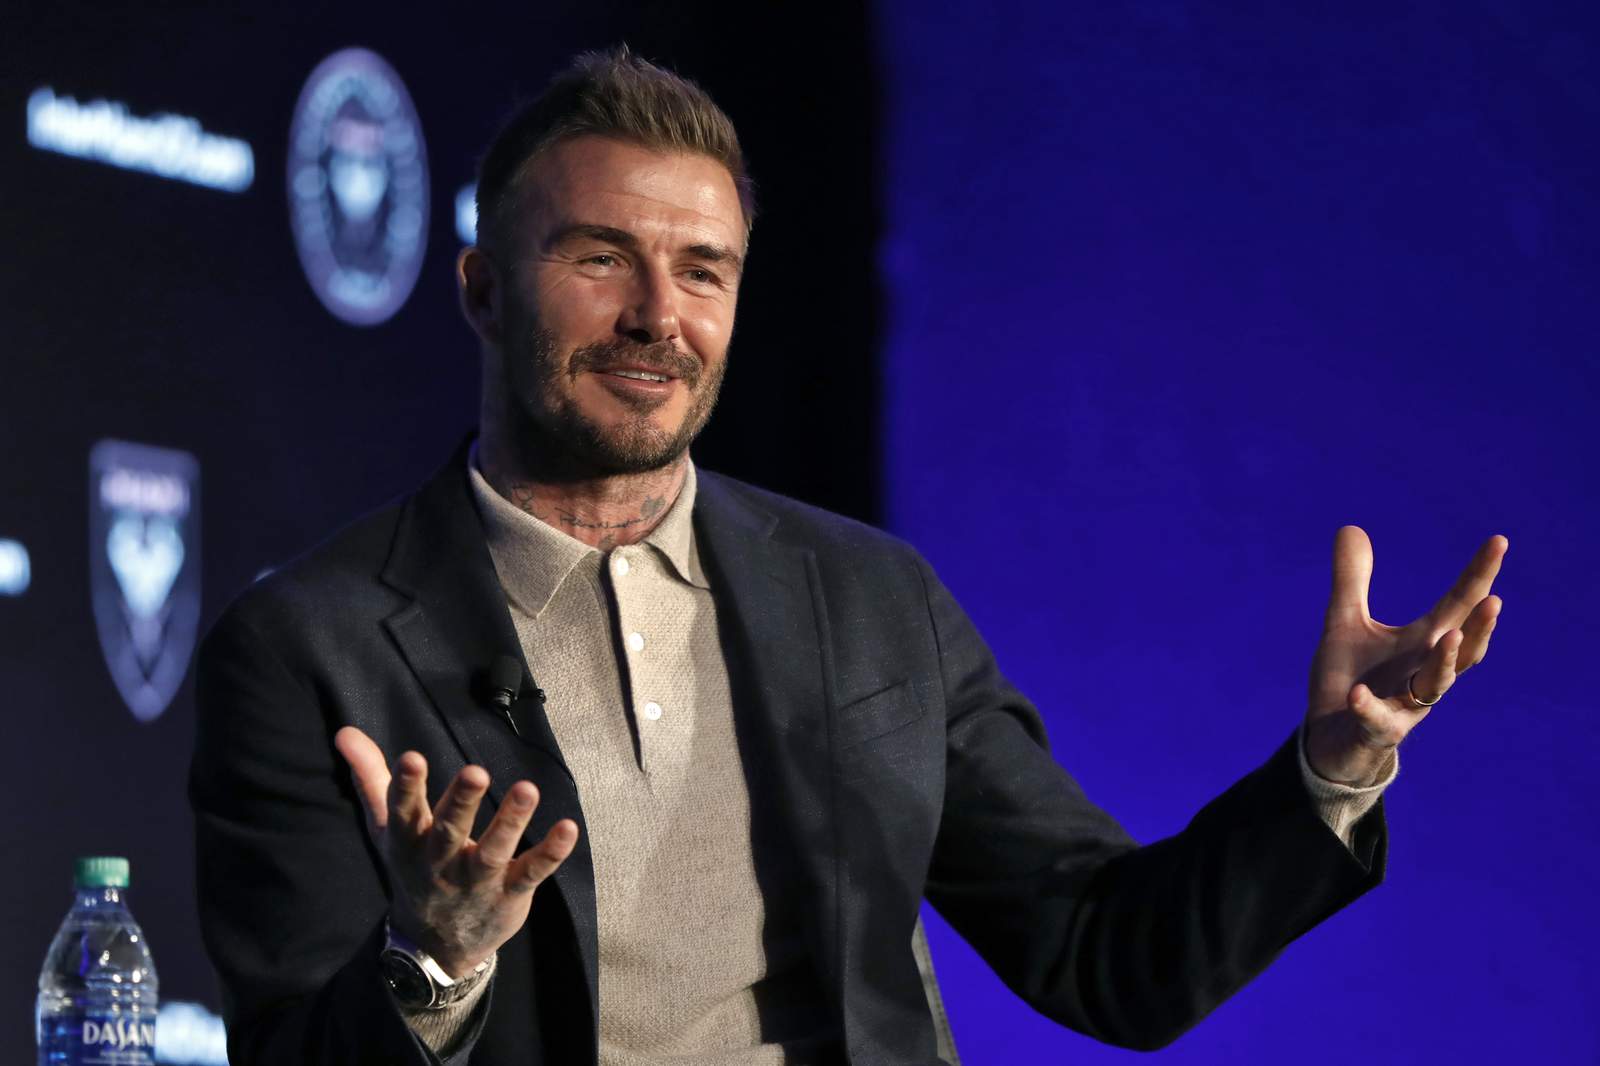 Beckham says Neville hired as coach on merit, not friendship